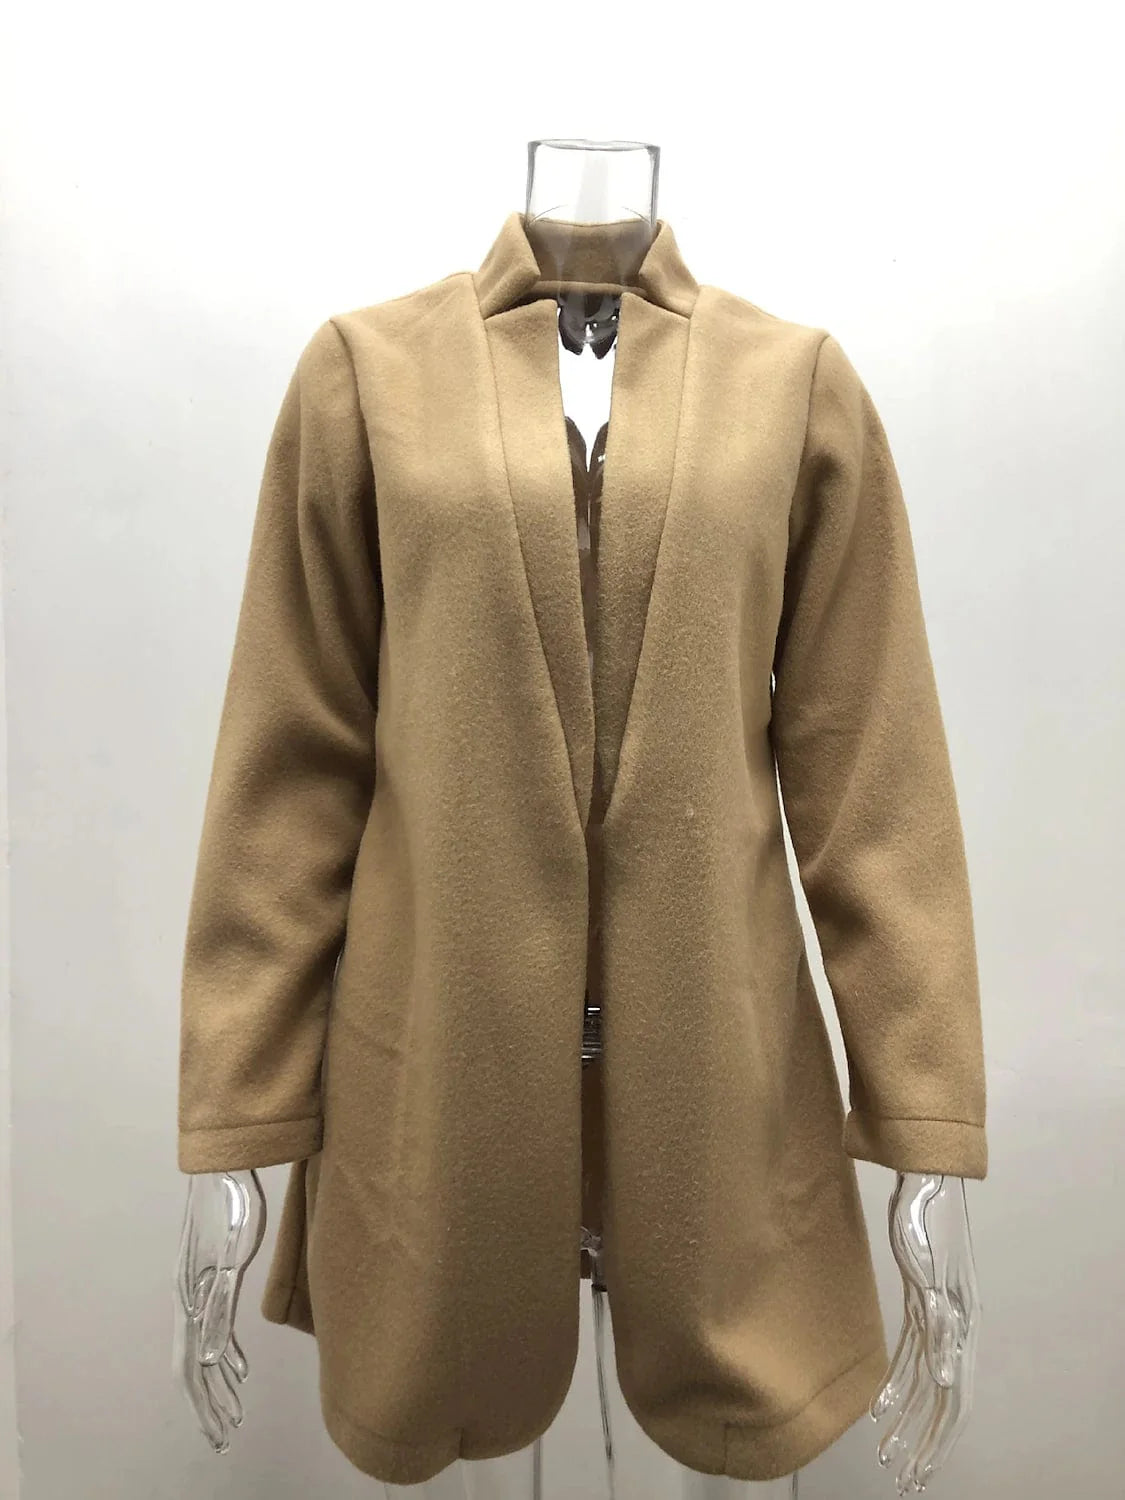 Caramel Colored Women's Open Front Regular Jacket for Spring, Fall, and Christmas